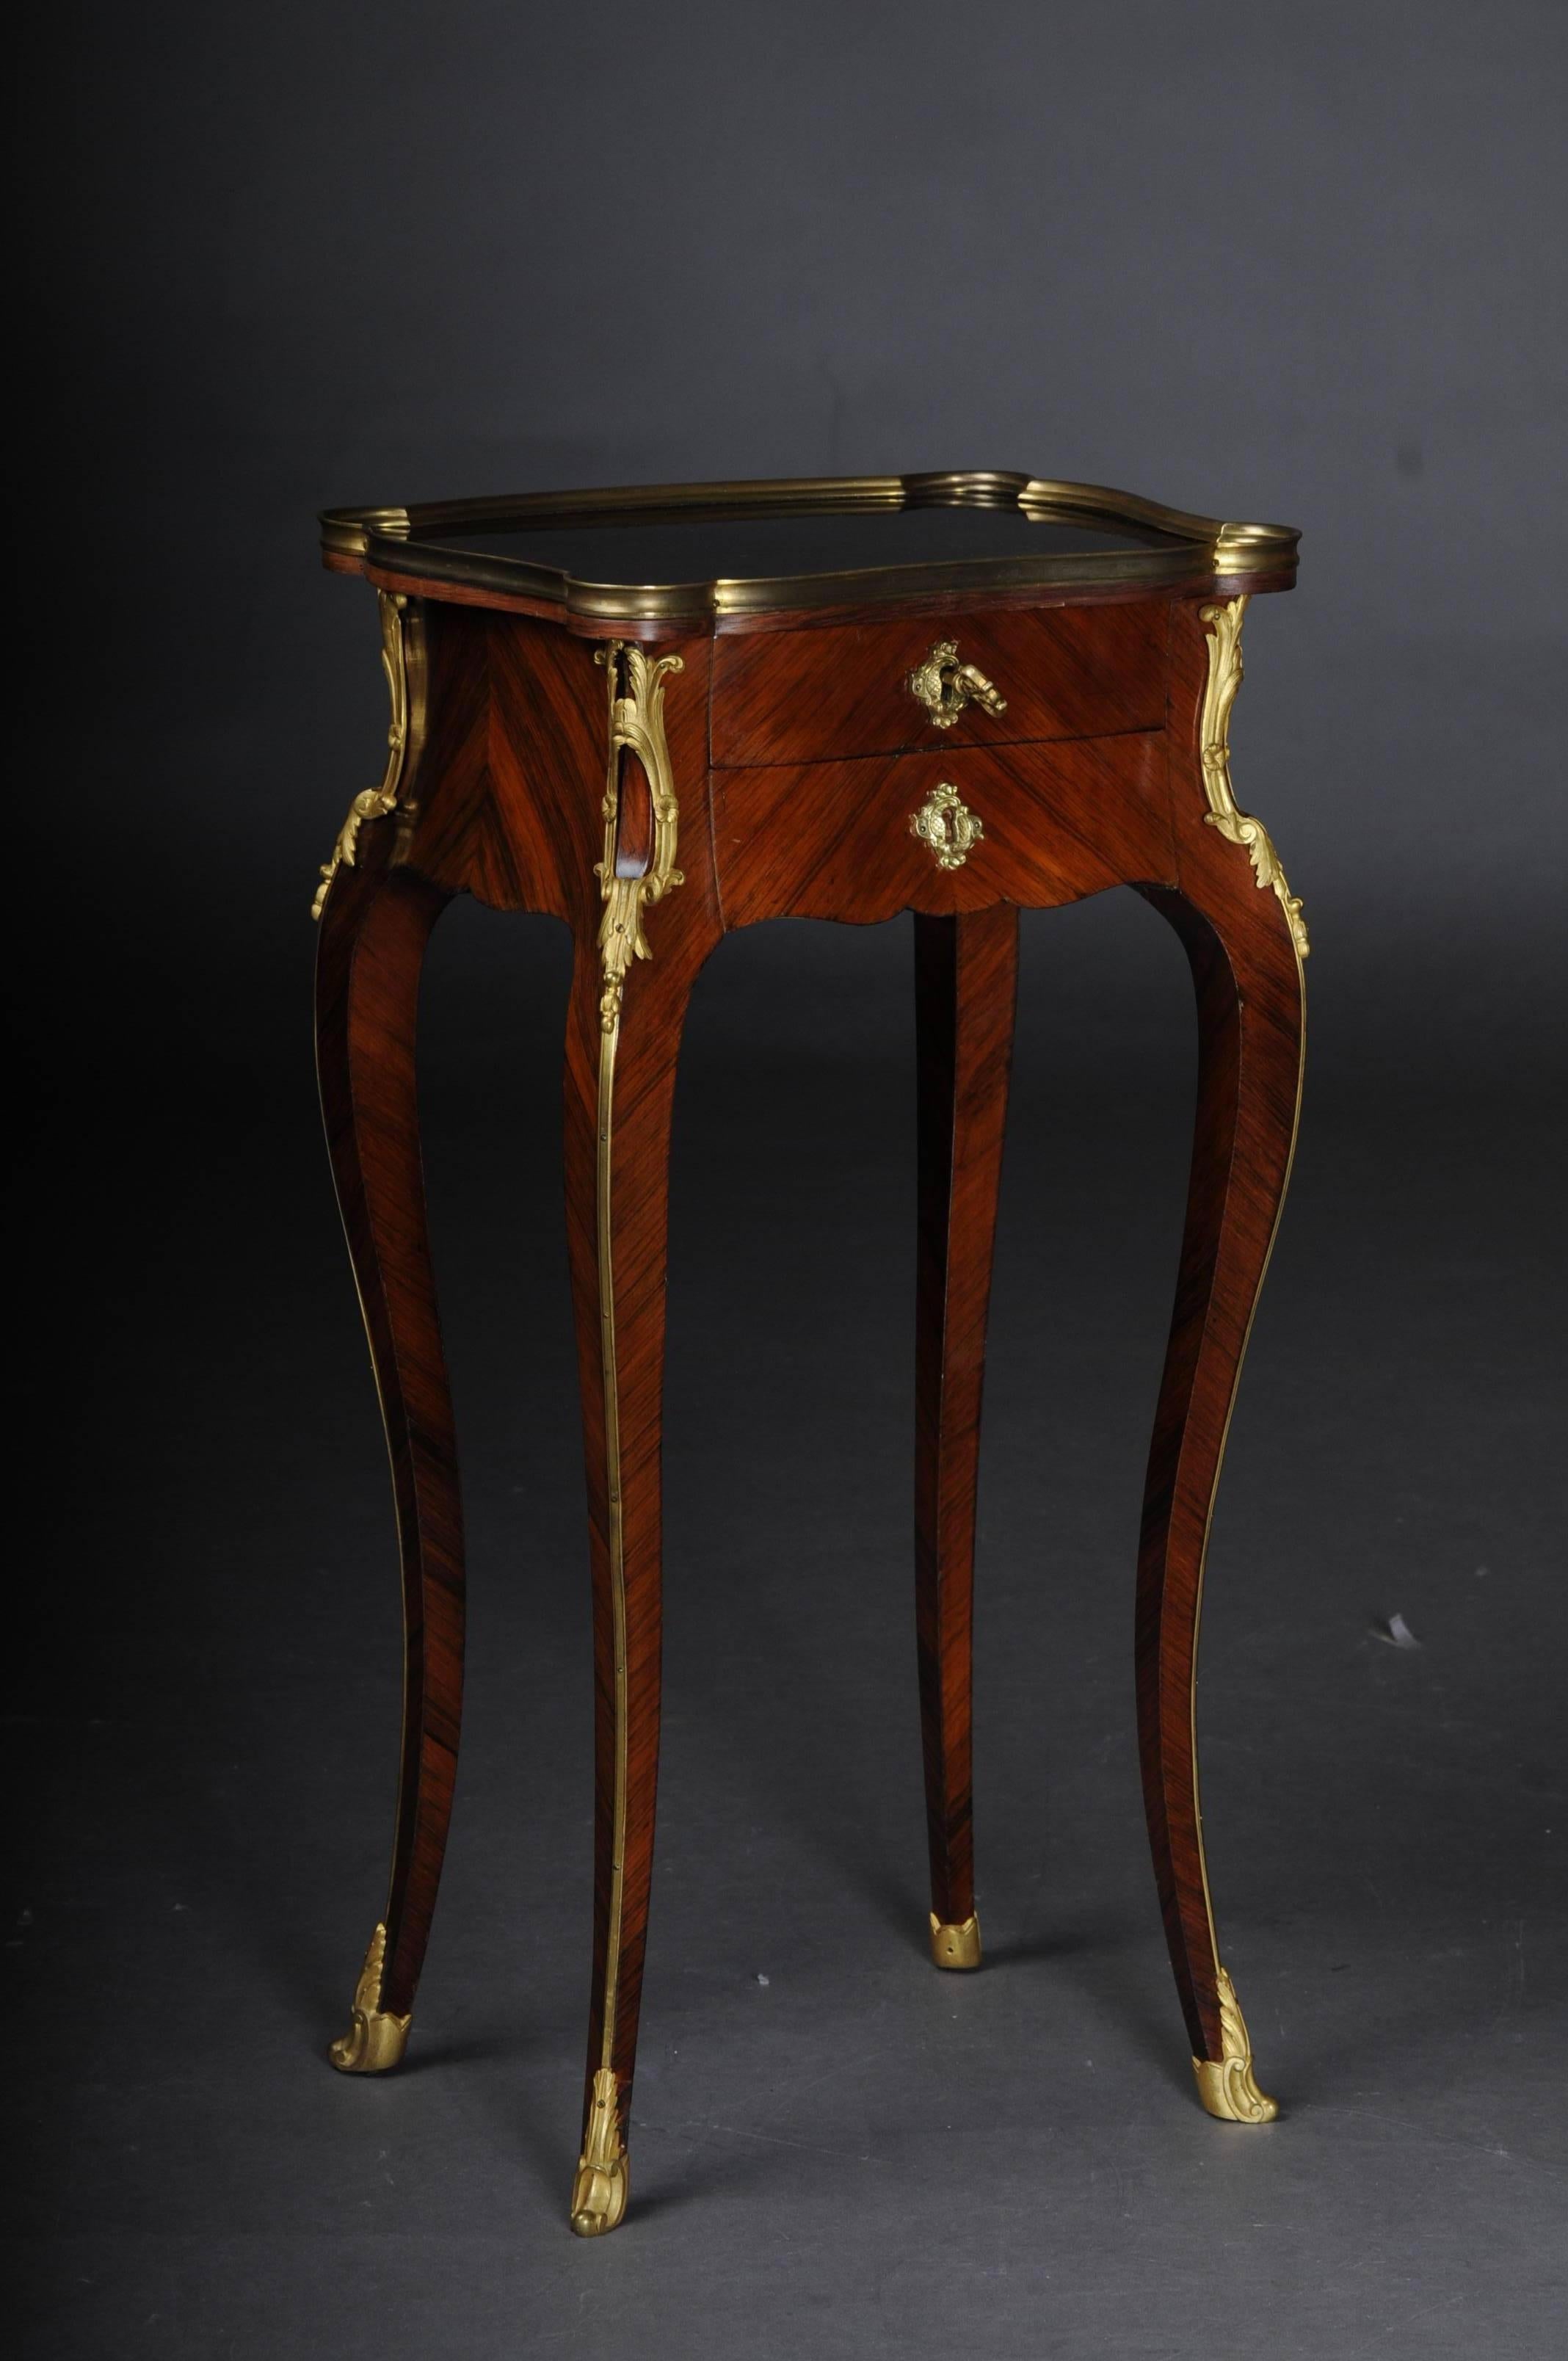 Solid woodFire-gilt fittings. Two drawers carcase ending on long curved legs in sabots.


(G-73).